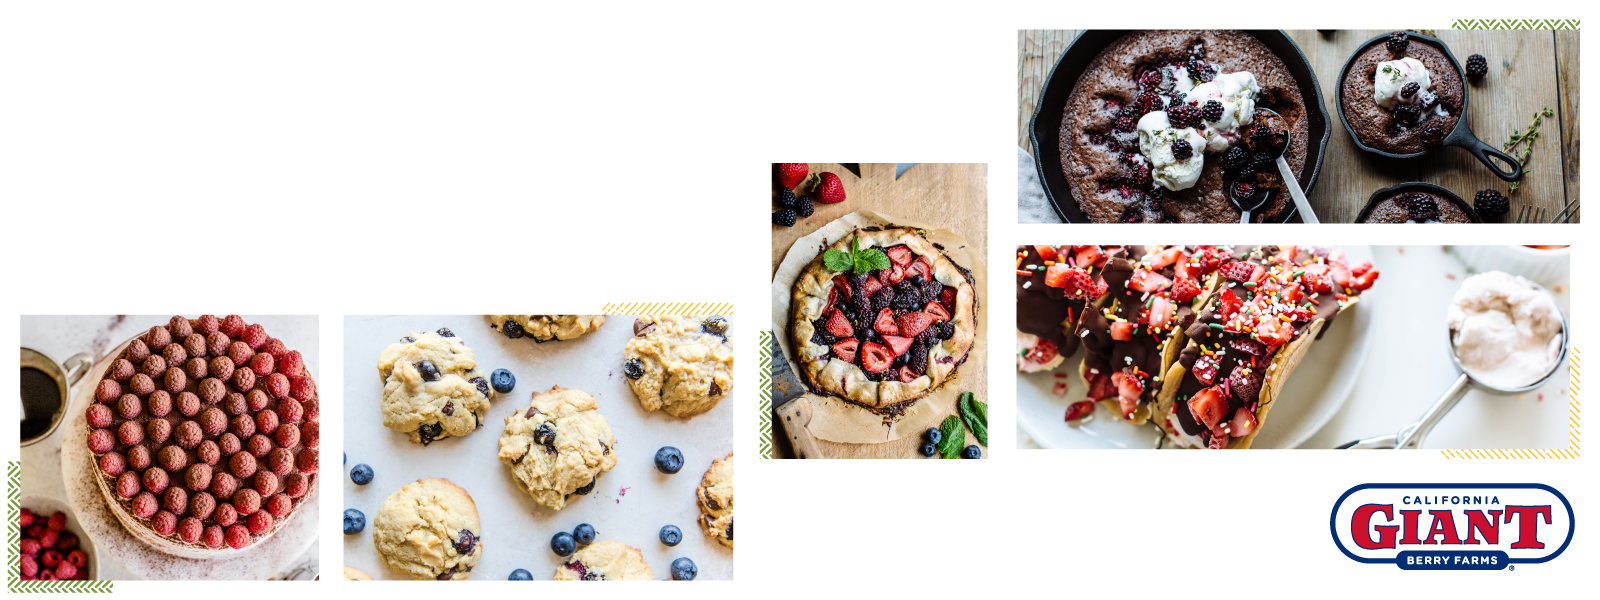 Berry Sweet Cravings | Dessert Recipes to Satisfy Your Sweet Tooth